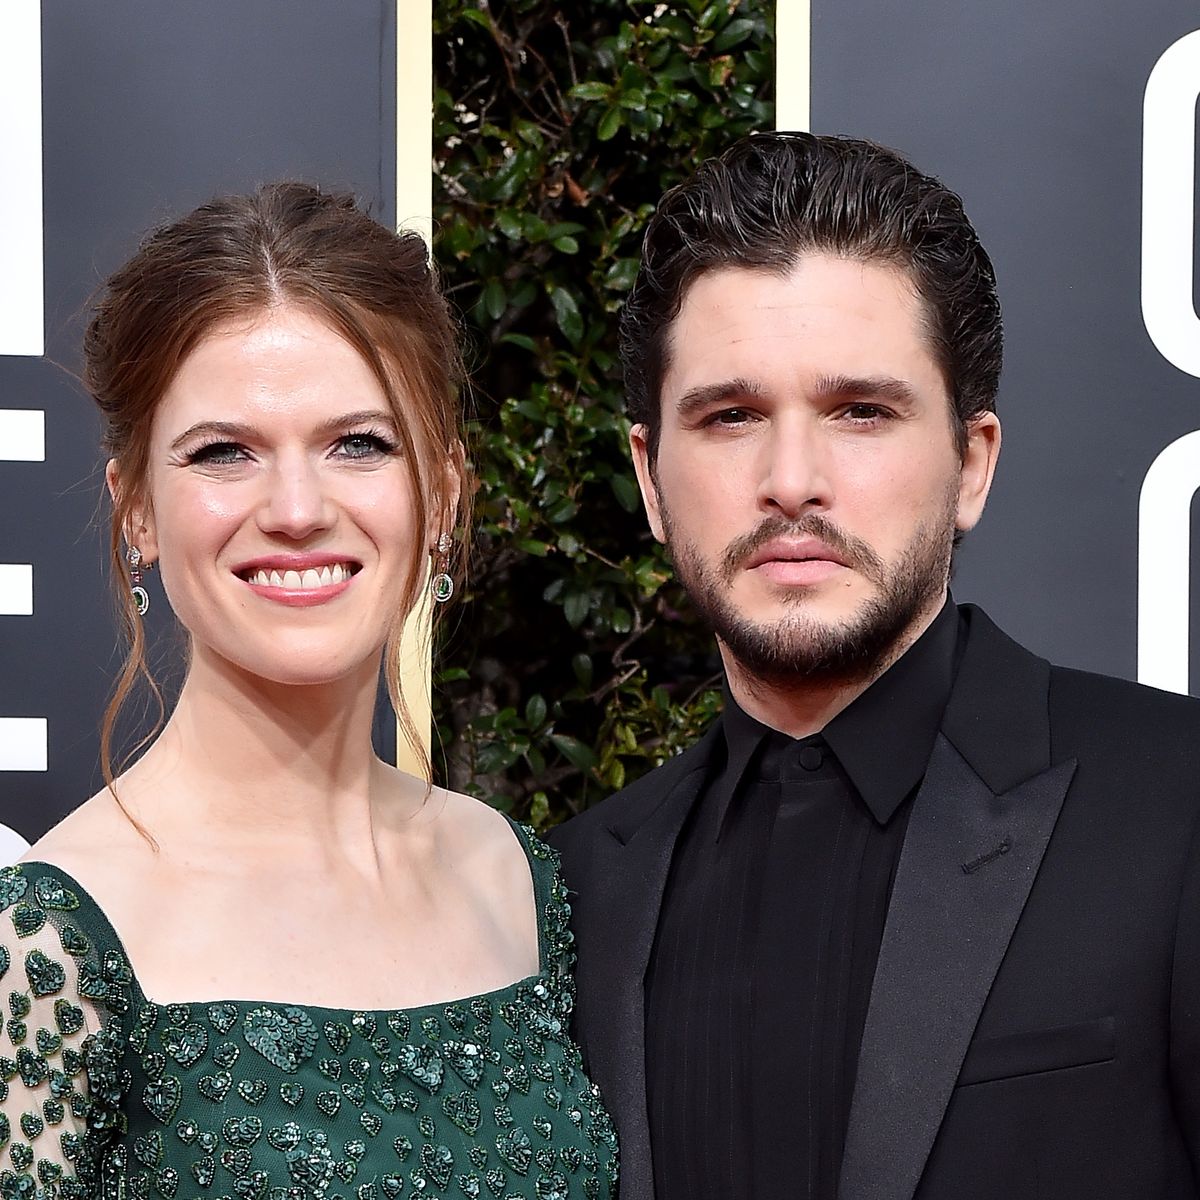 You are currently viewing ‘Game Of Thrones’ actor Kit Harington shares uncommon knowledge about ‘Parenting’ with spouse Rose Leslie